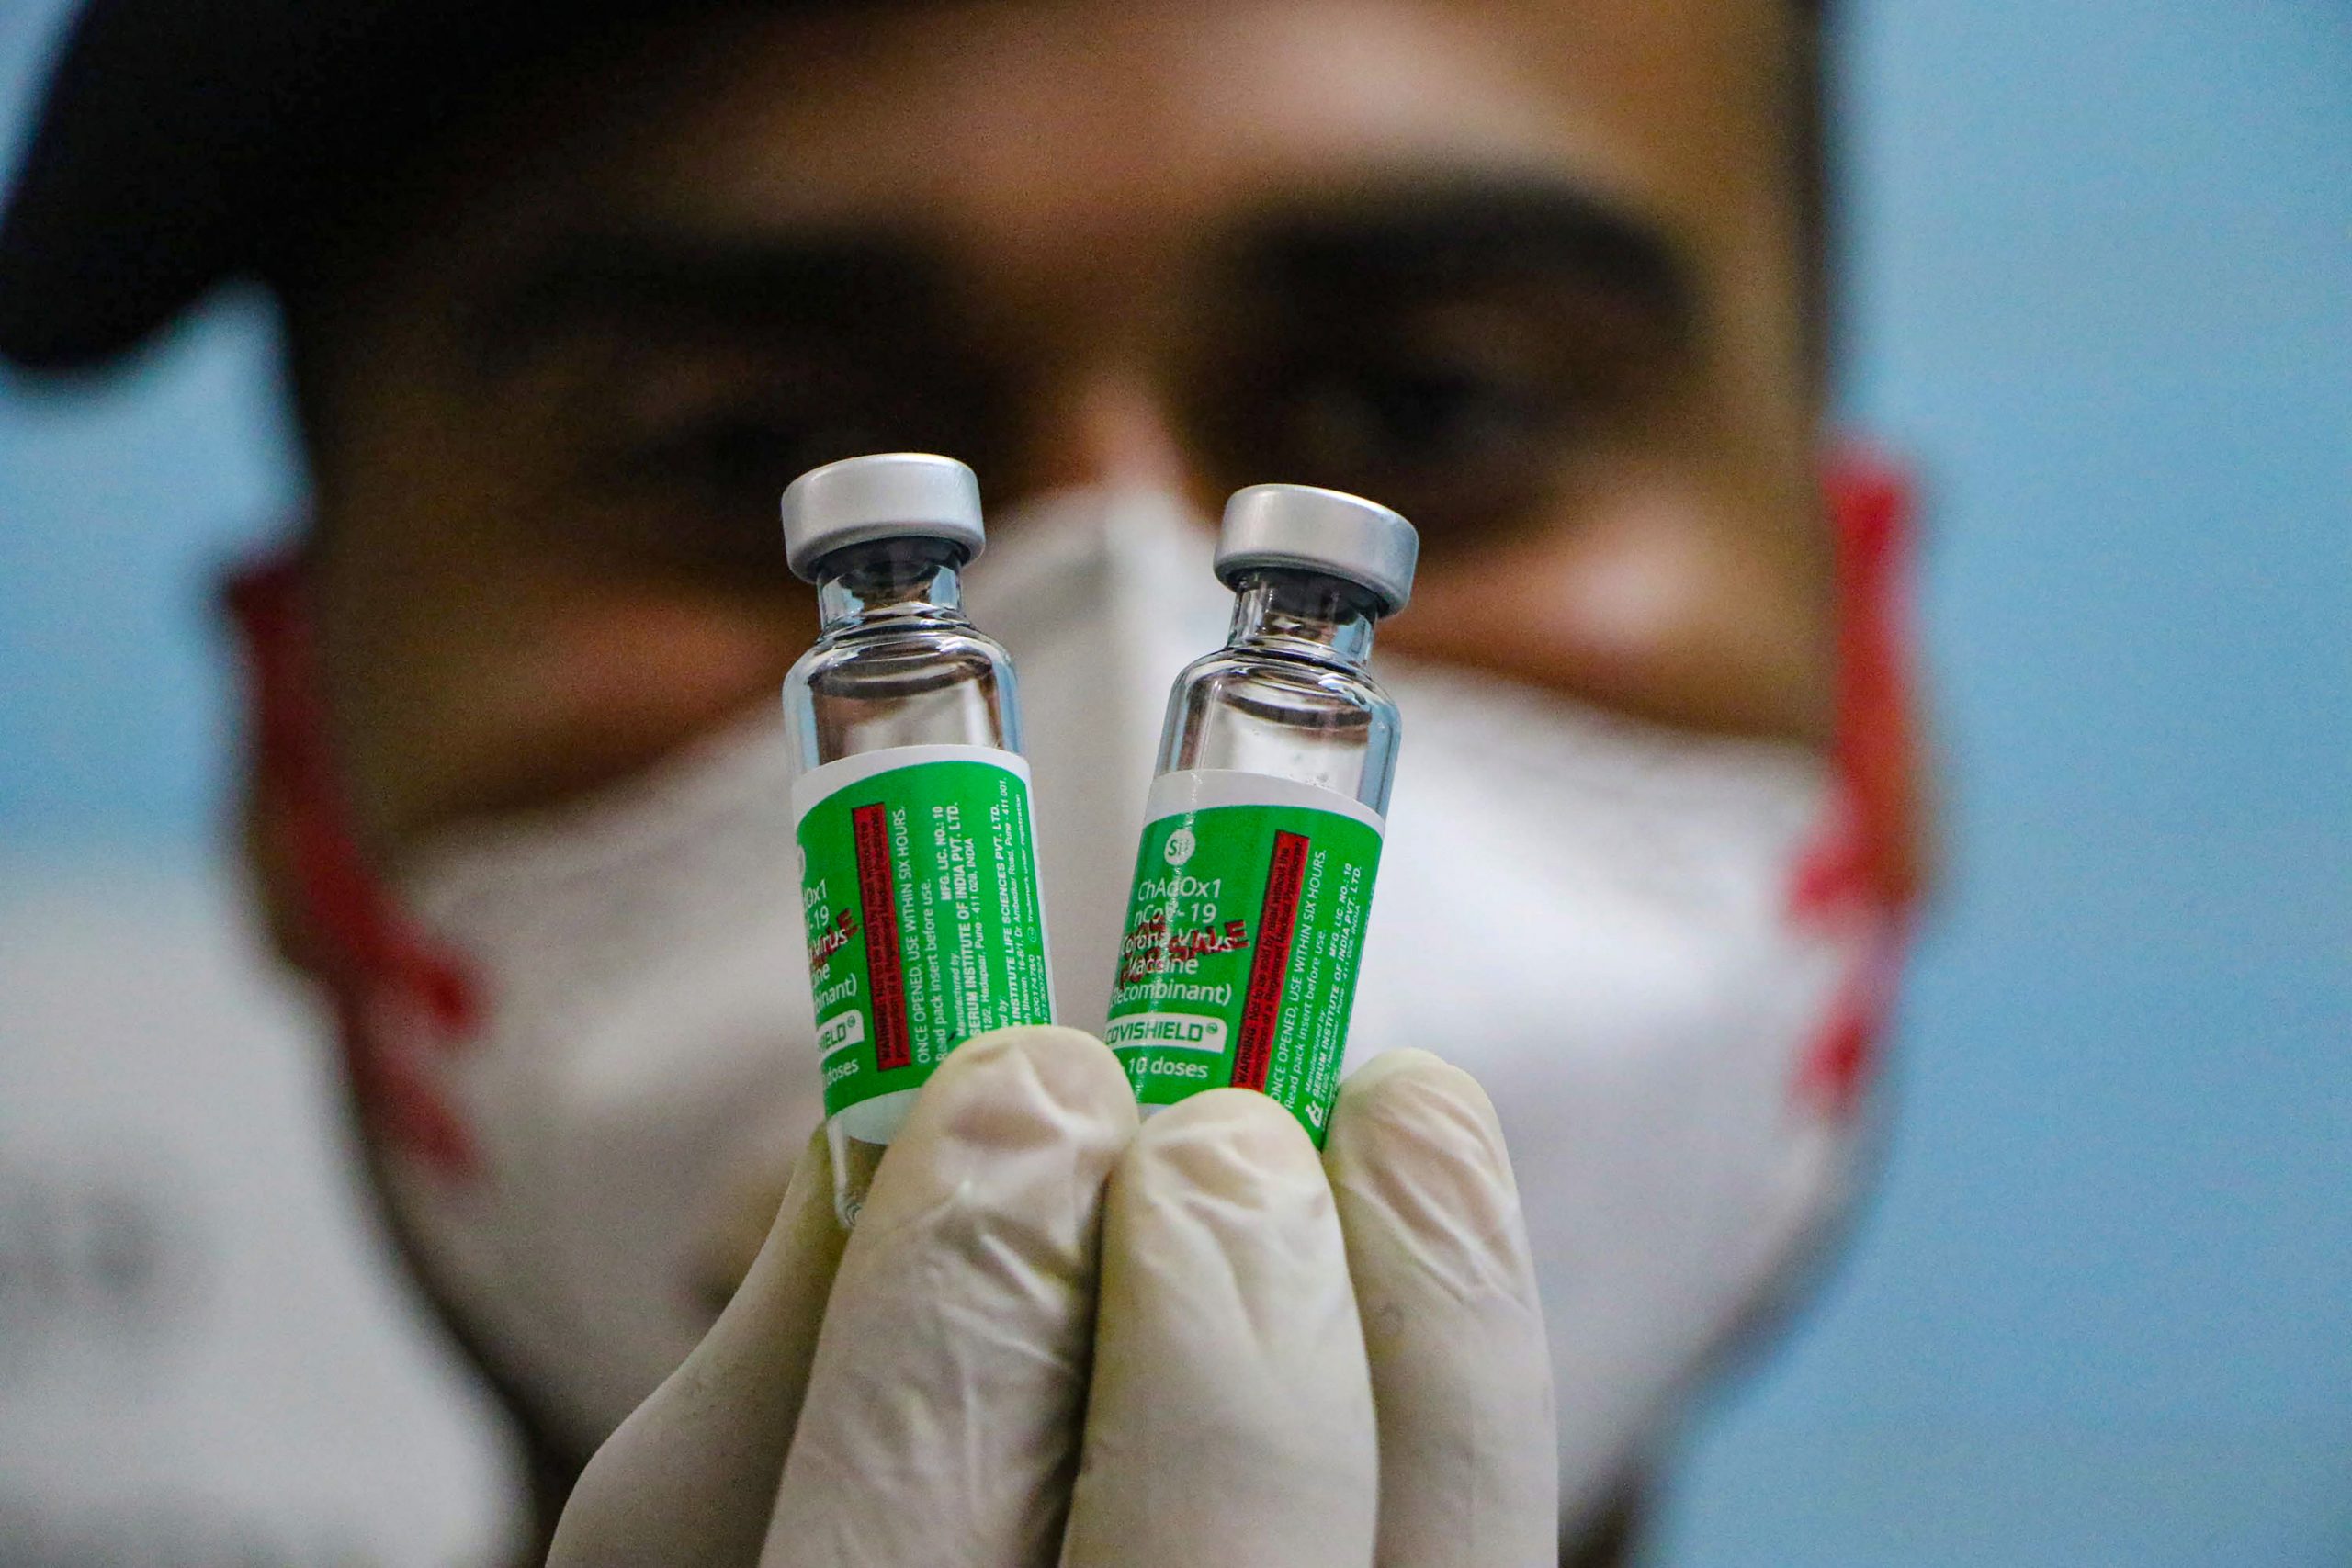 Serum’s Covishield vaccine priced at Rs 400 a dose for states, Rs 600 for pvt hospitals